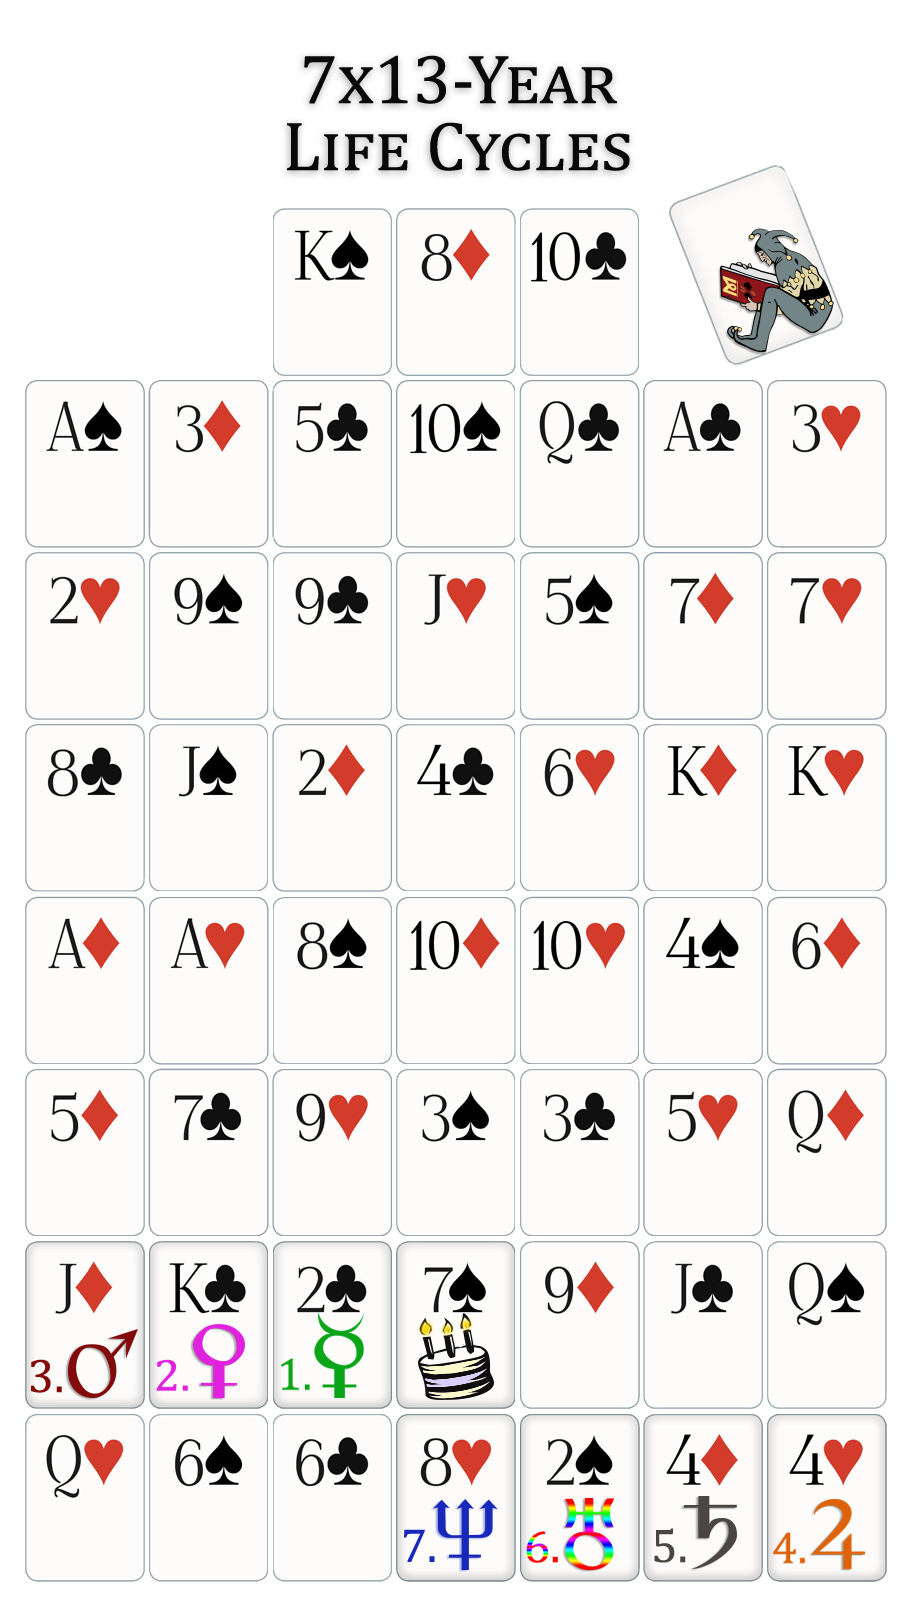 seven life cycle cards for the 7 of spade